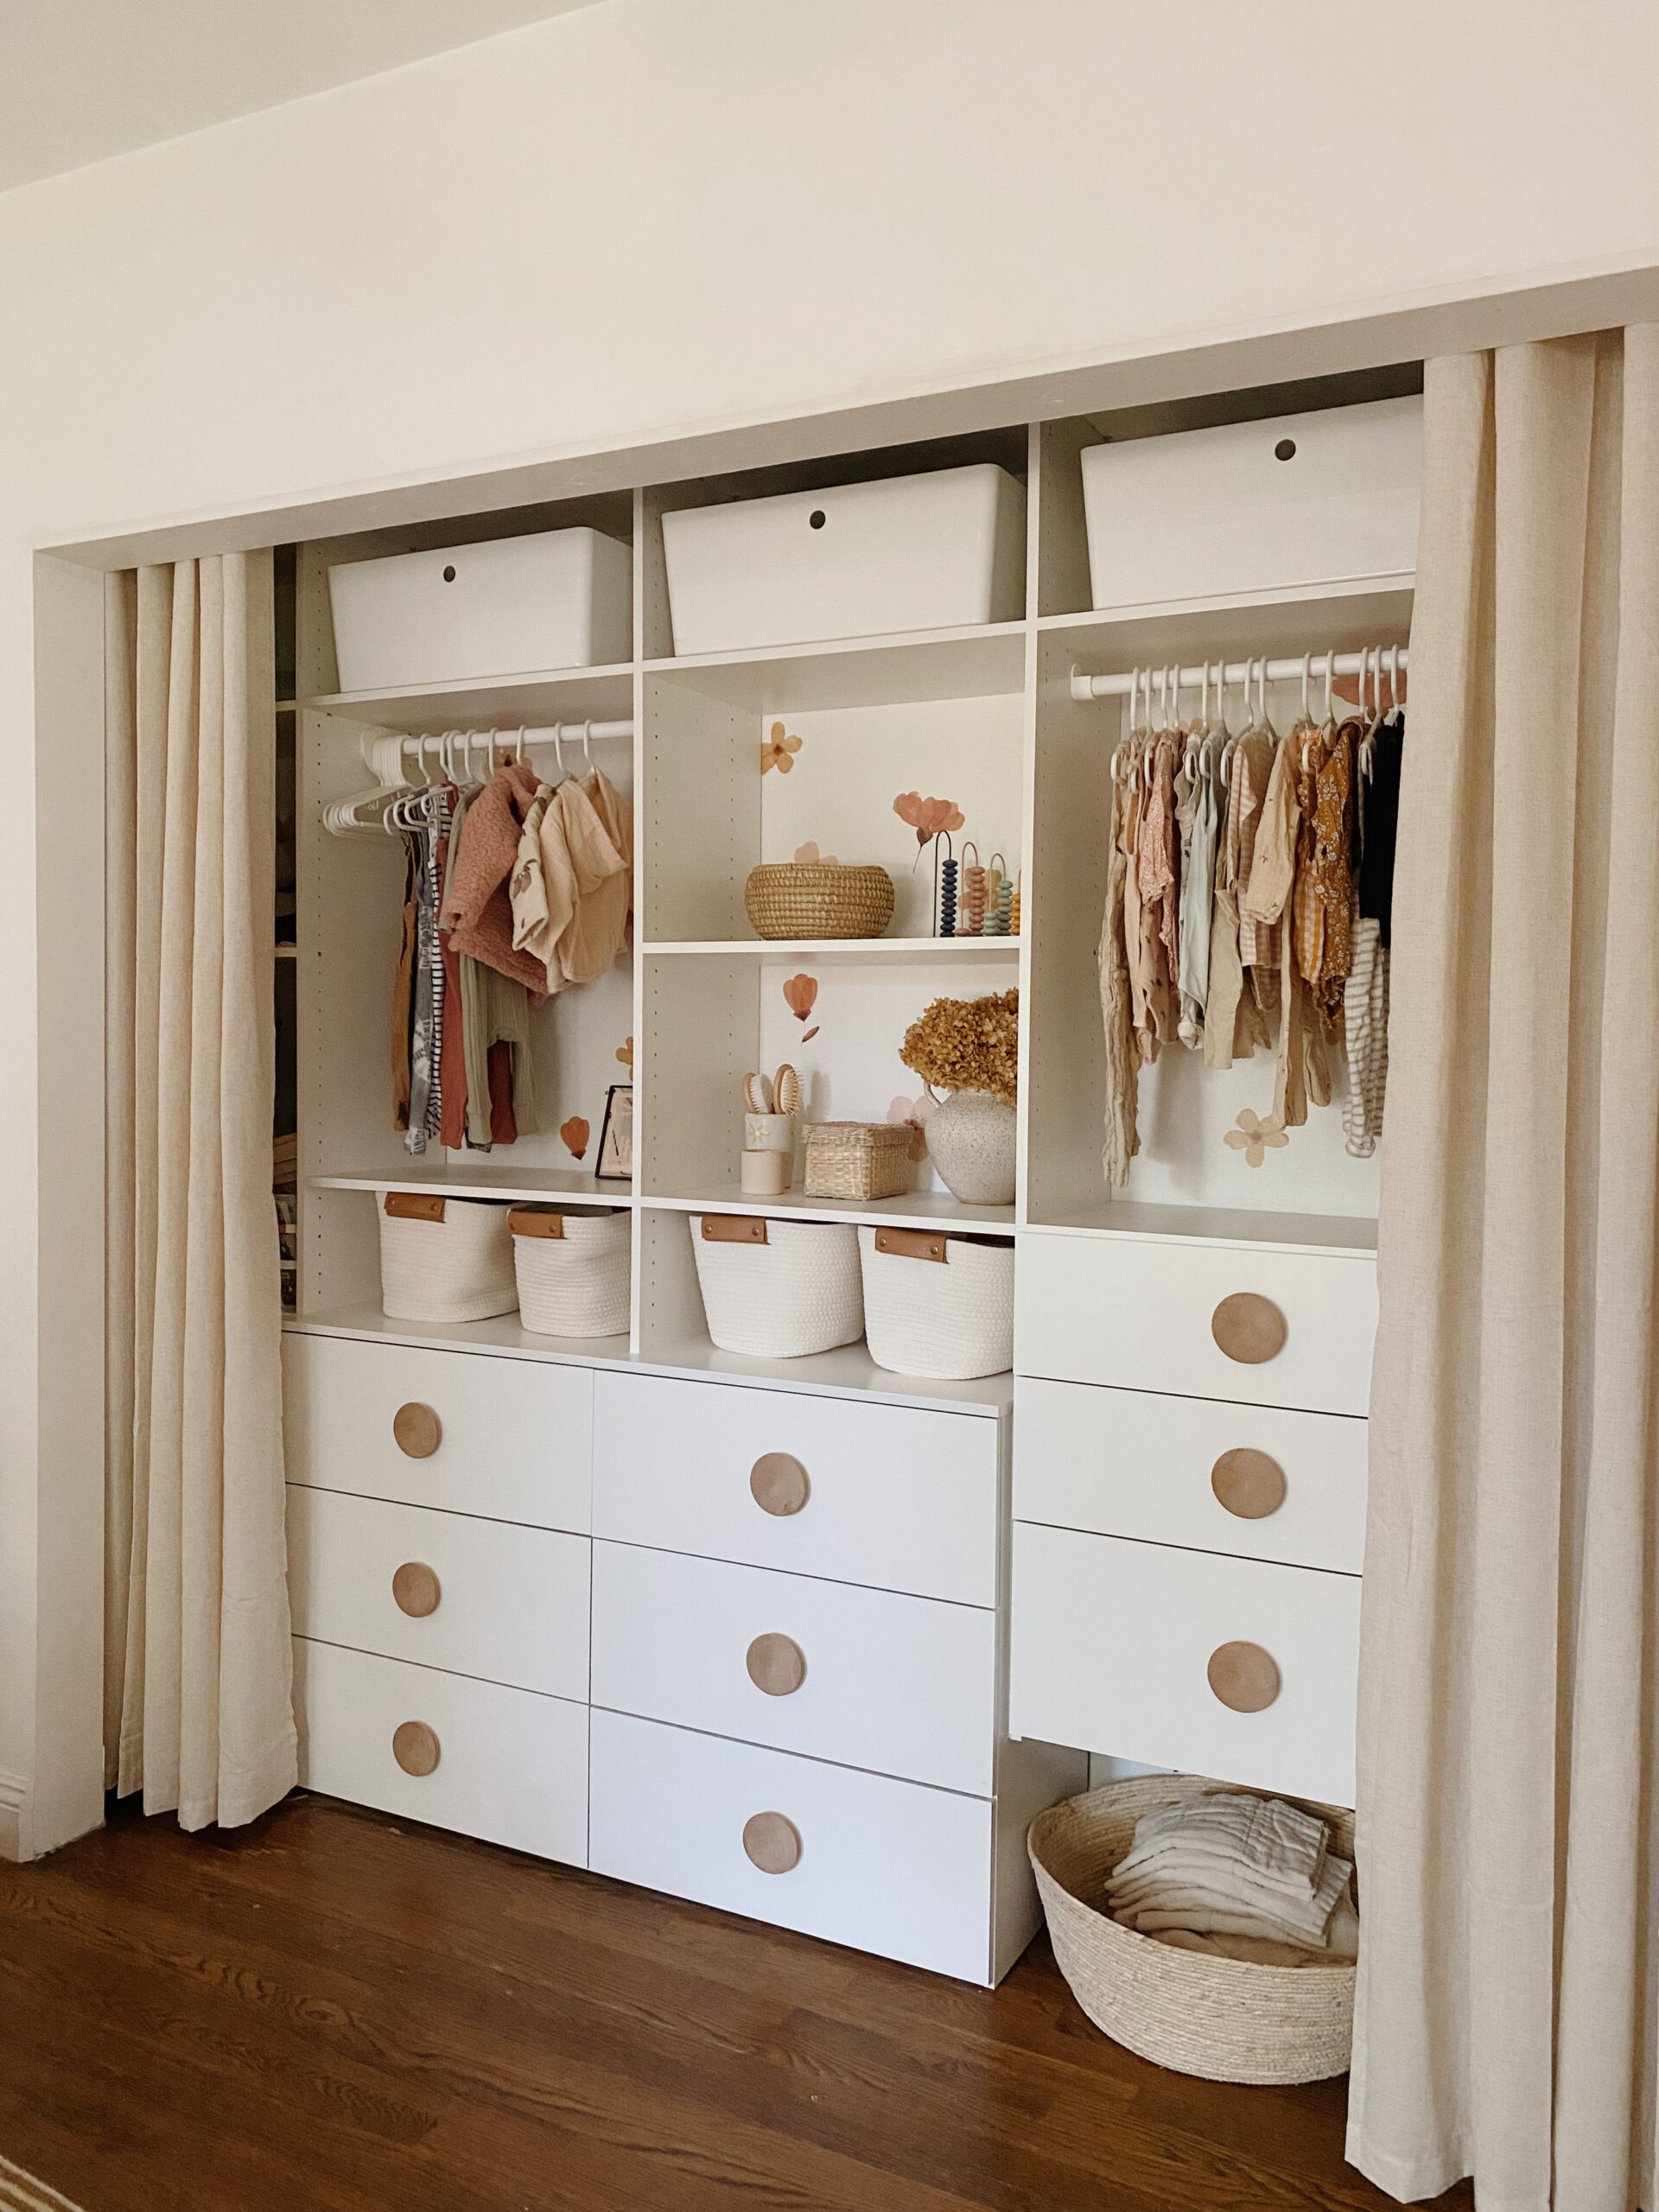 The Nursery Closet Almost Makes Perfect